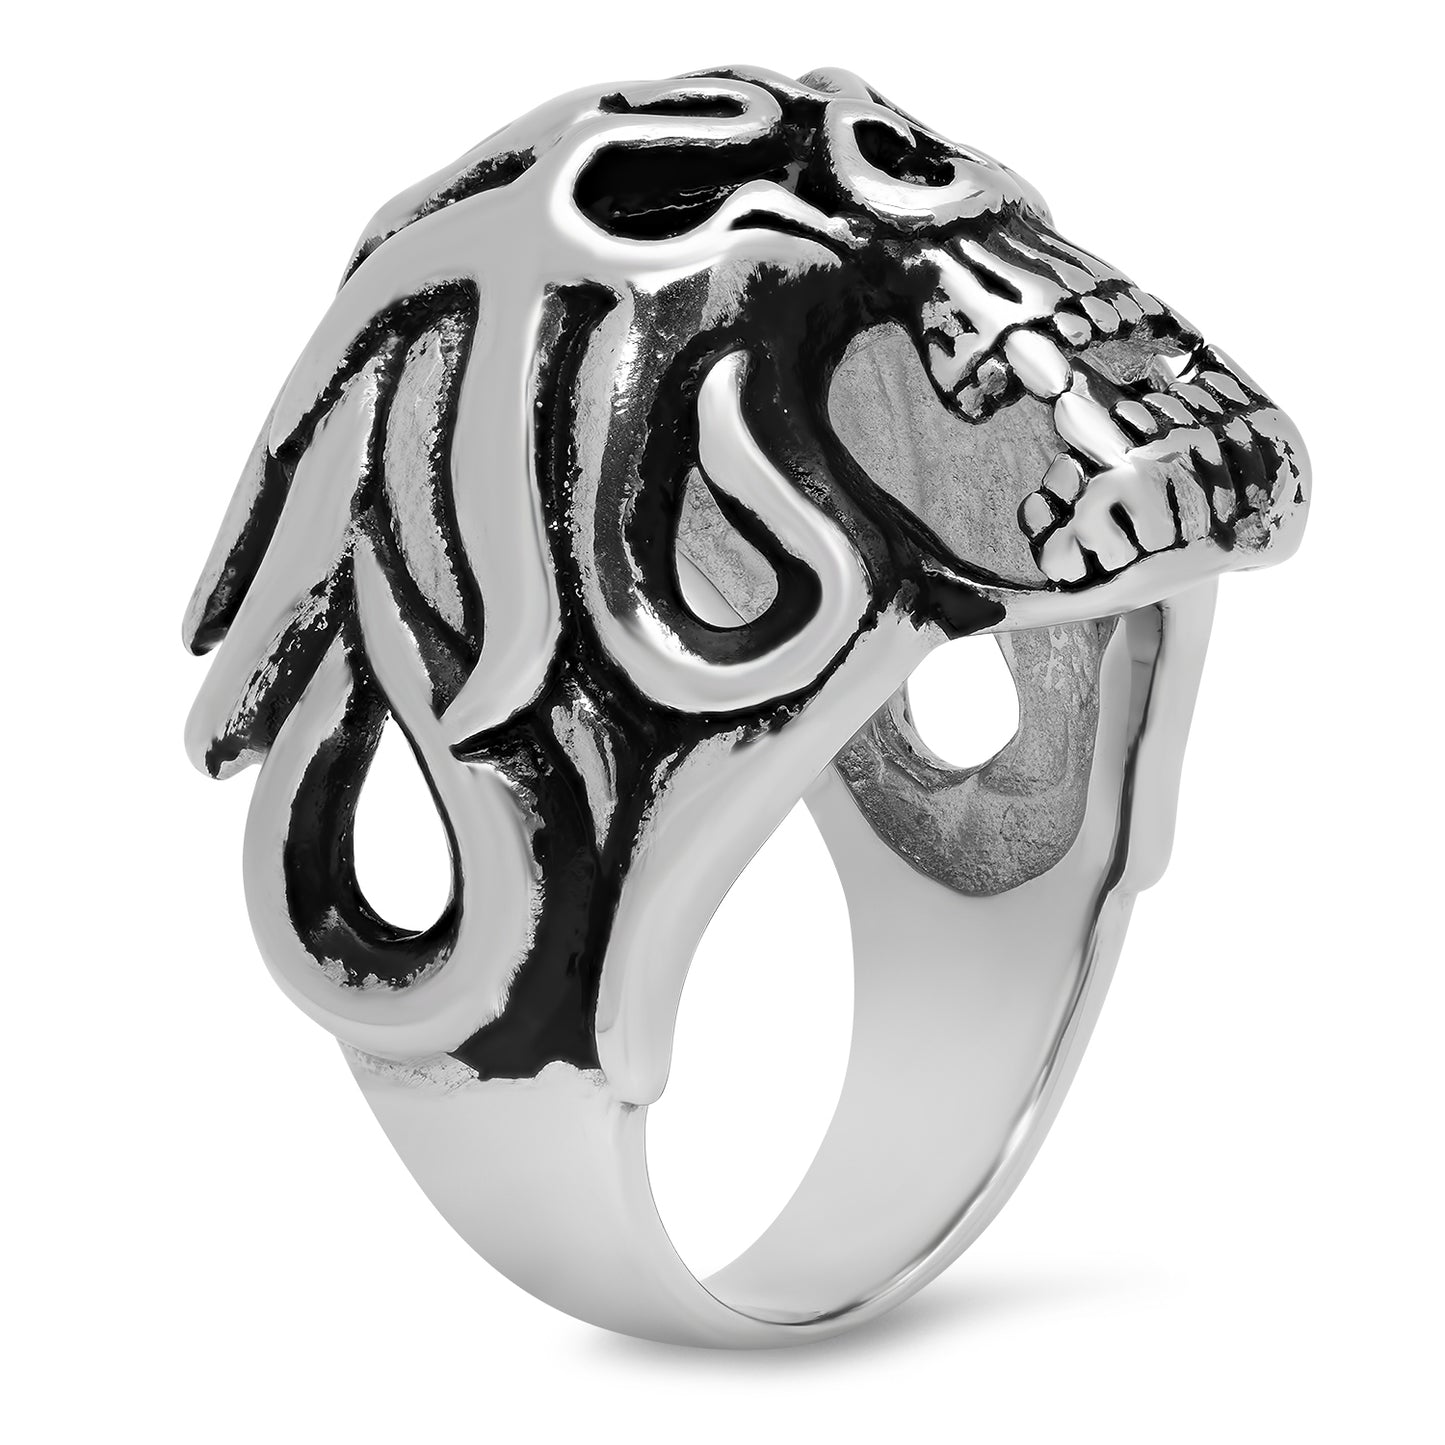 26mm Stainless Steel Flaming Demon Skull Ring + Jewelry Cloth & Pouch (SKU: ST-SKR129)